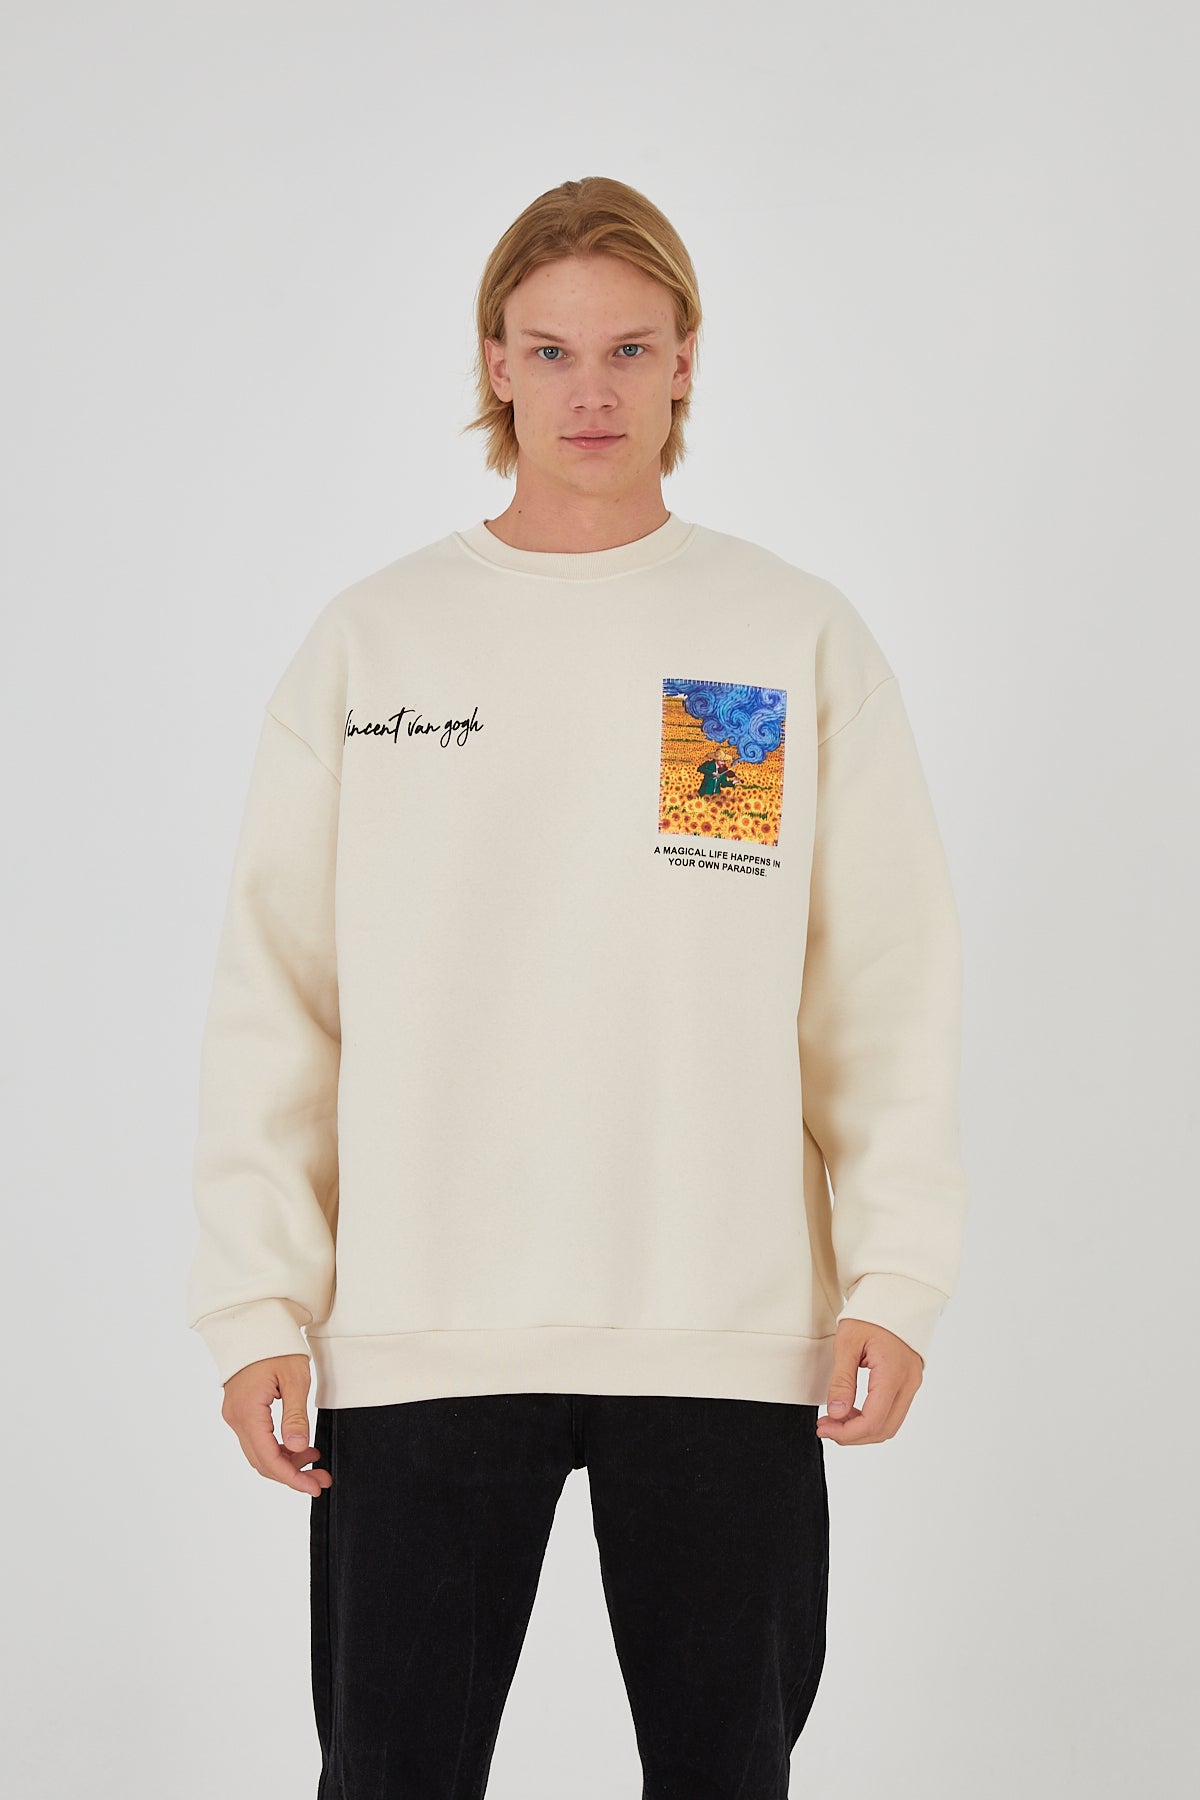 SWEATER - SAILING BOAT - OFF WHITE - DYS-Amsterdam